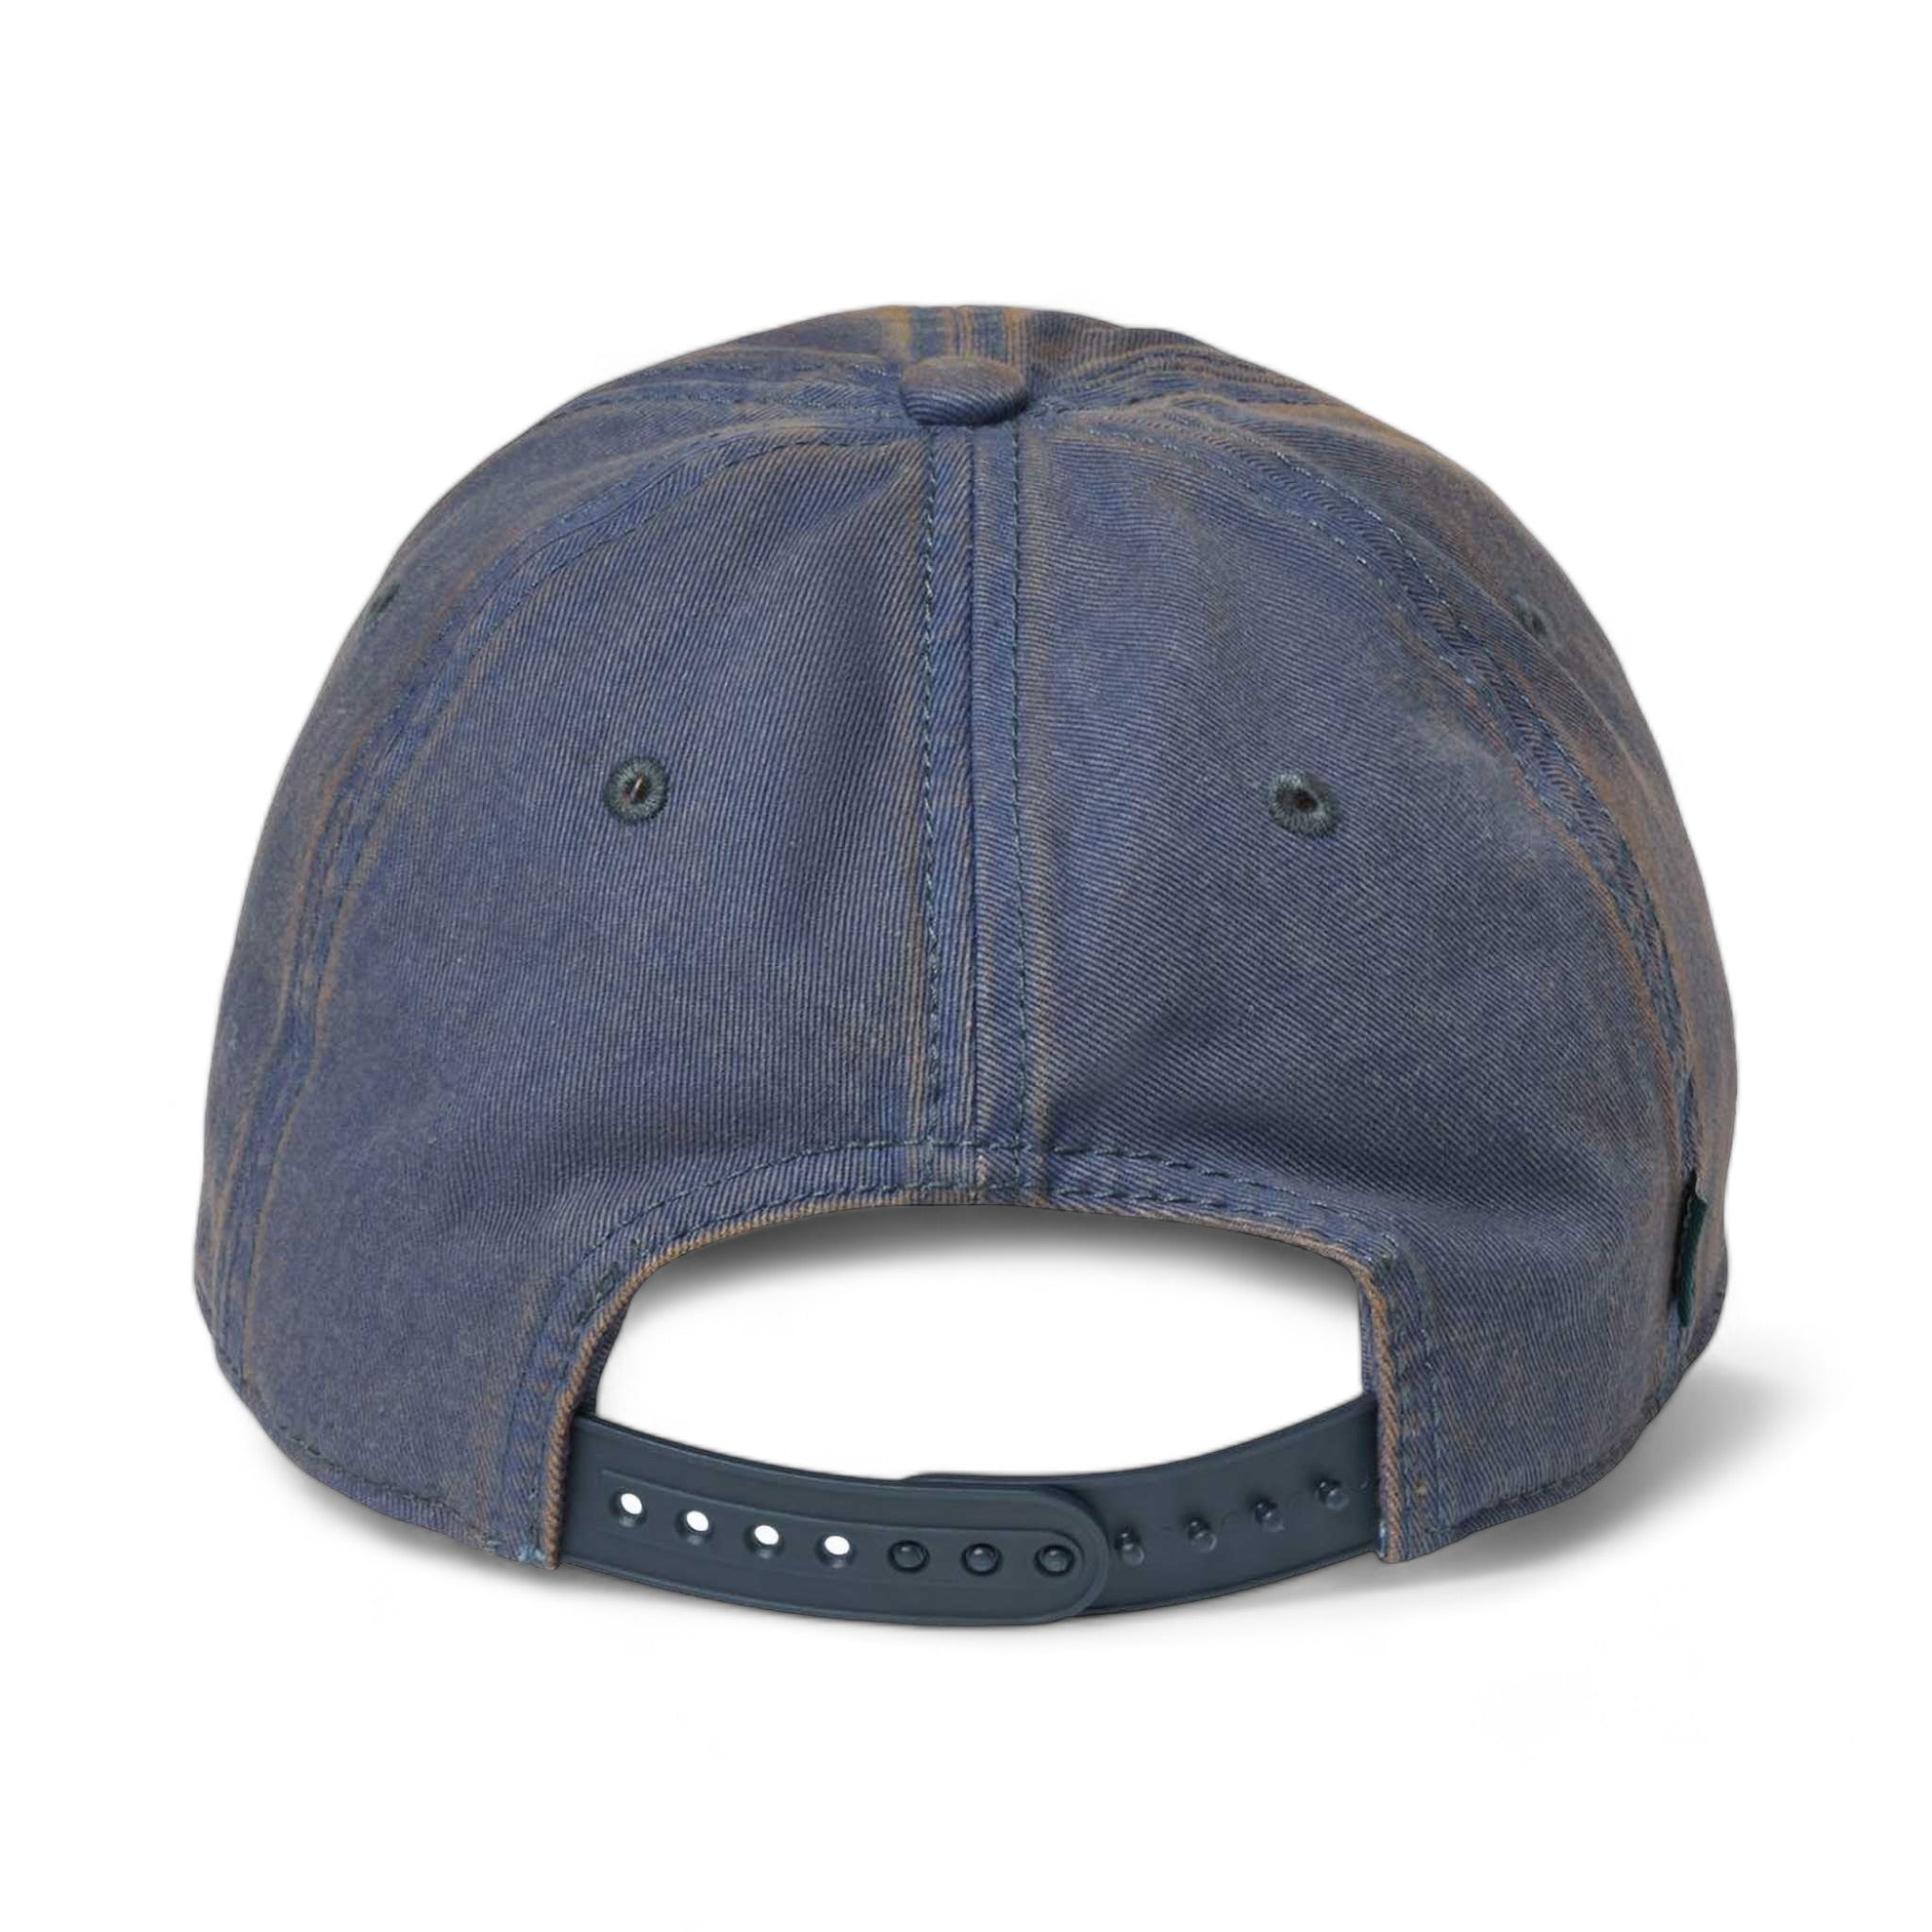 Back view of LEGACY OFAST custom hat in blue